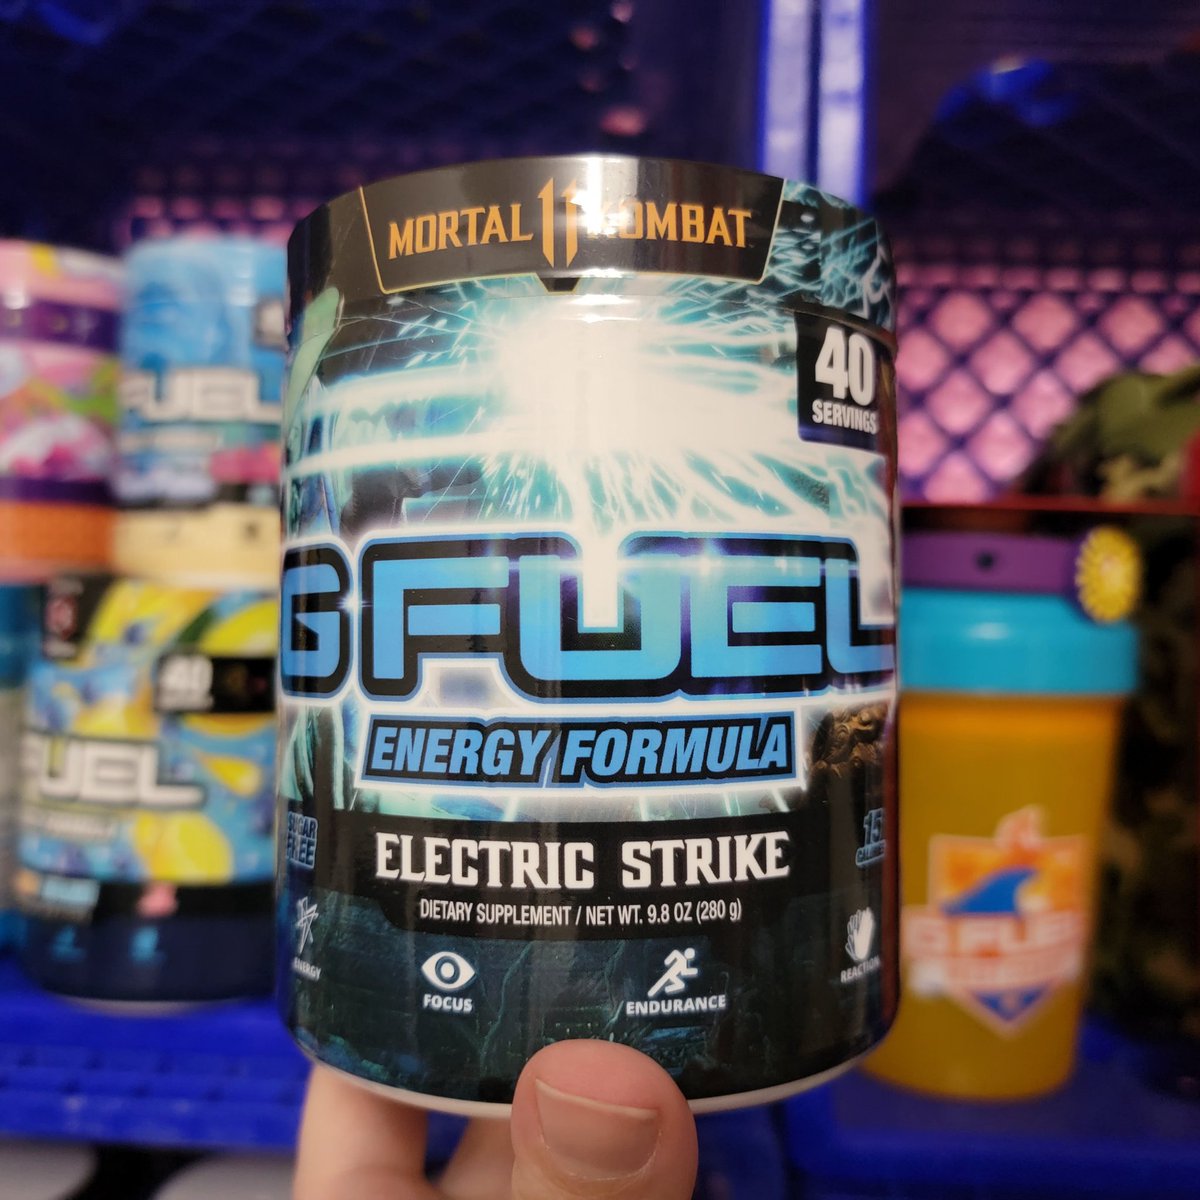 Gfuel flavor of the Day 

Got that delicious Electric Strike in the shaker today. @GFuelEnergy 

Have a great rest of your day everyone. #GFUEL #GSQUAD #FuturePartner